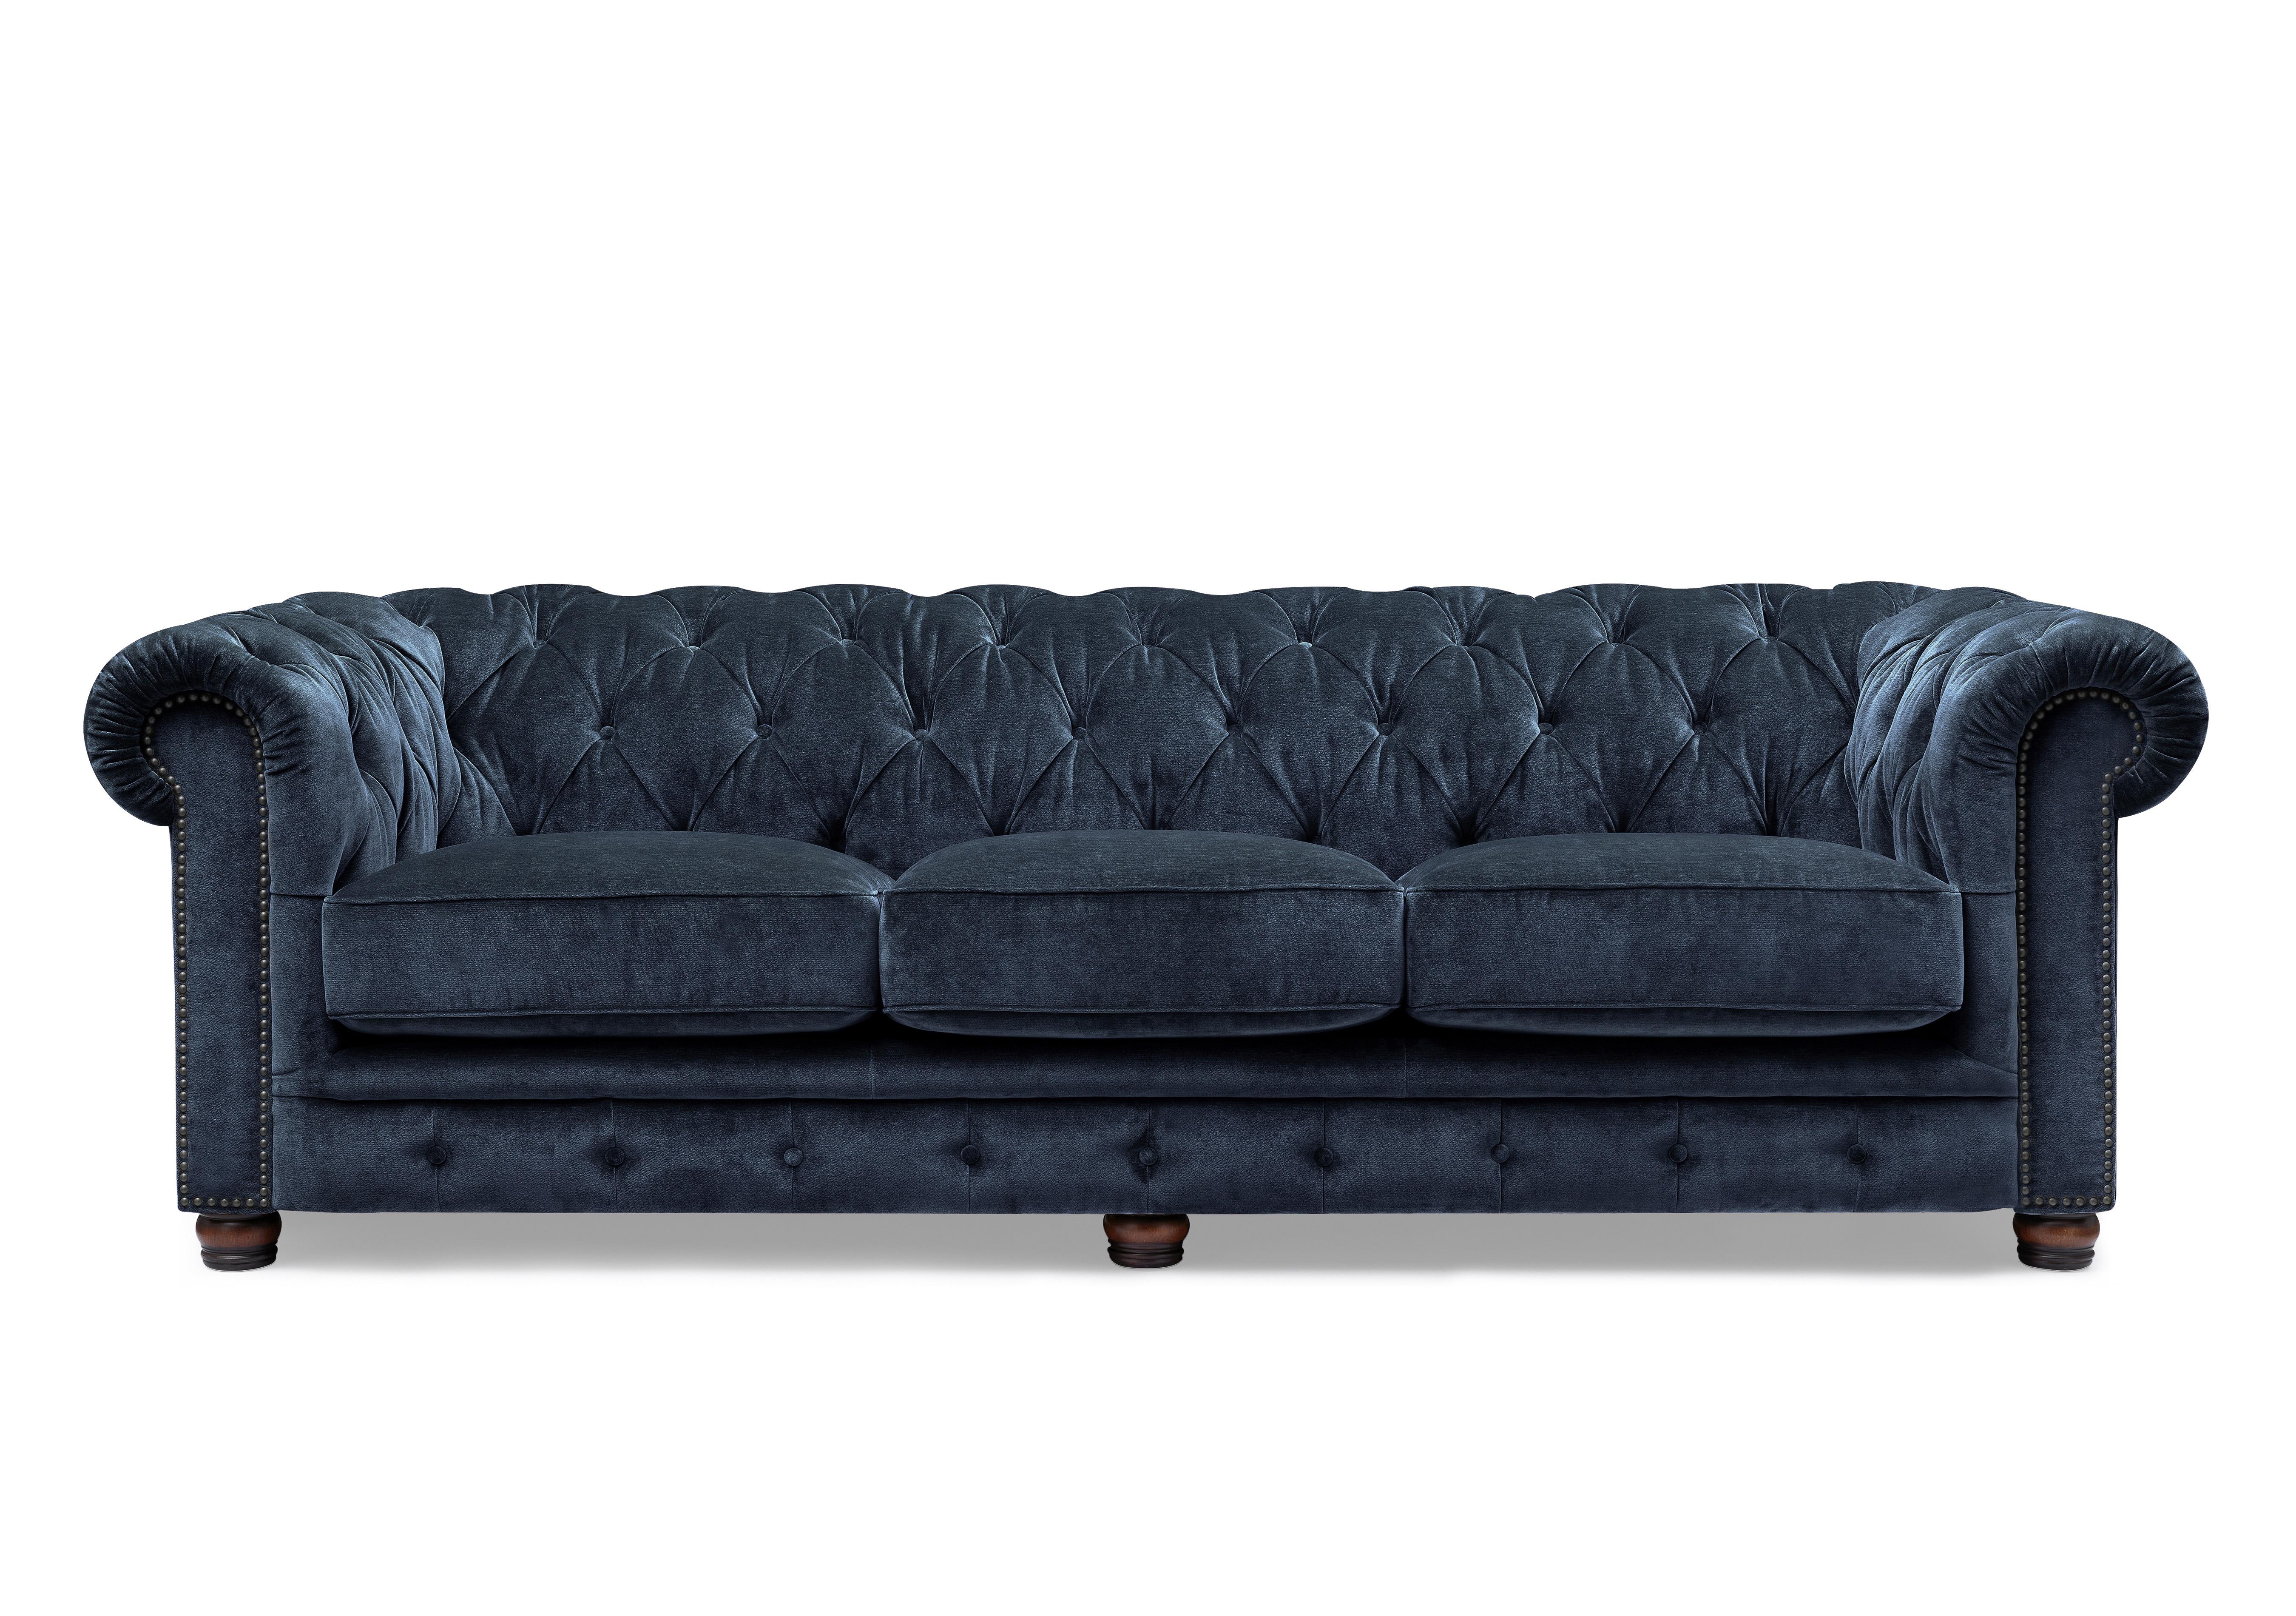 Shackleton 4 Seater Fabric Chesterfield Sofa with USB-C in X3y2-W024 Midnight on Furniture Village